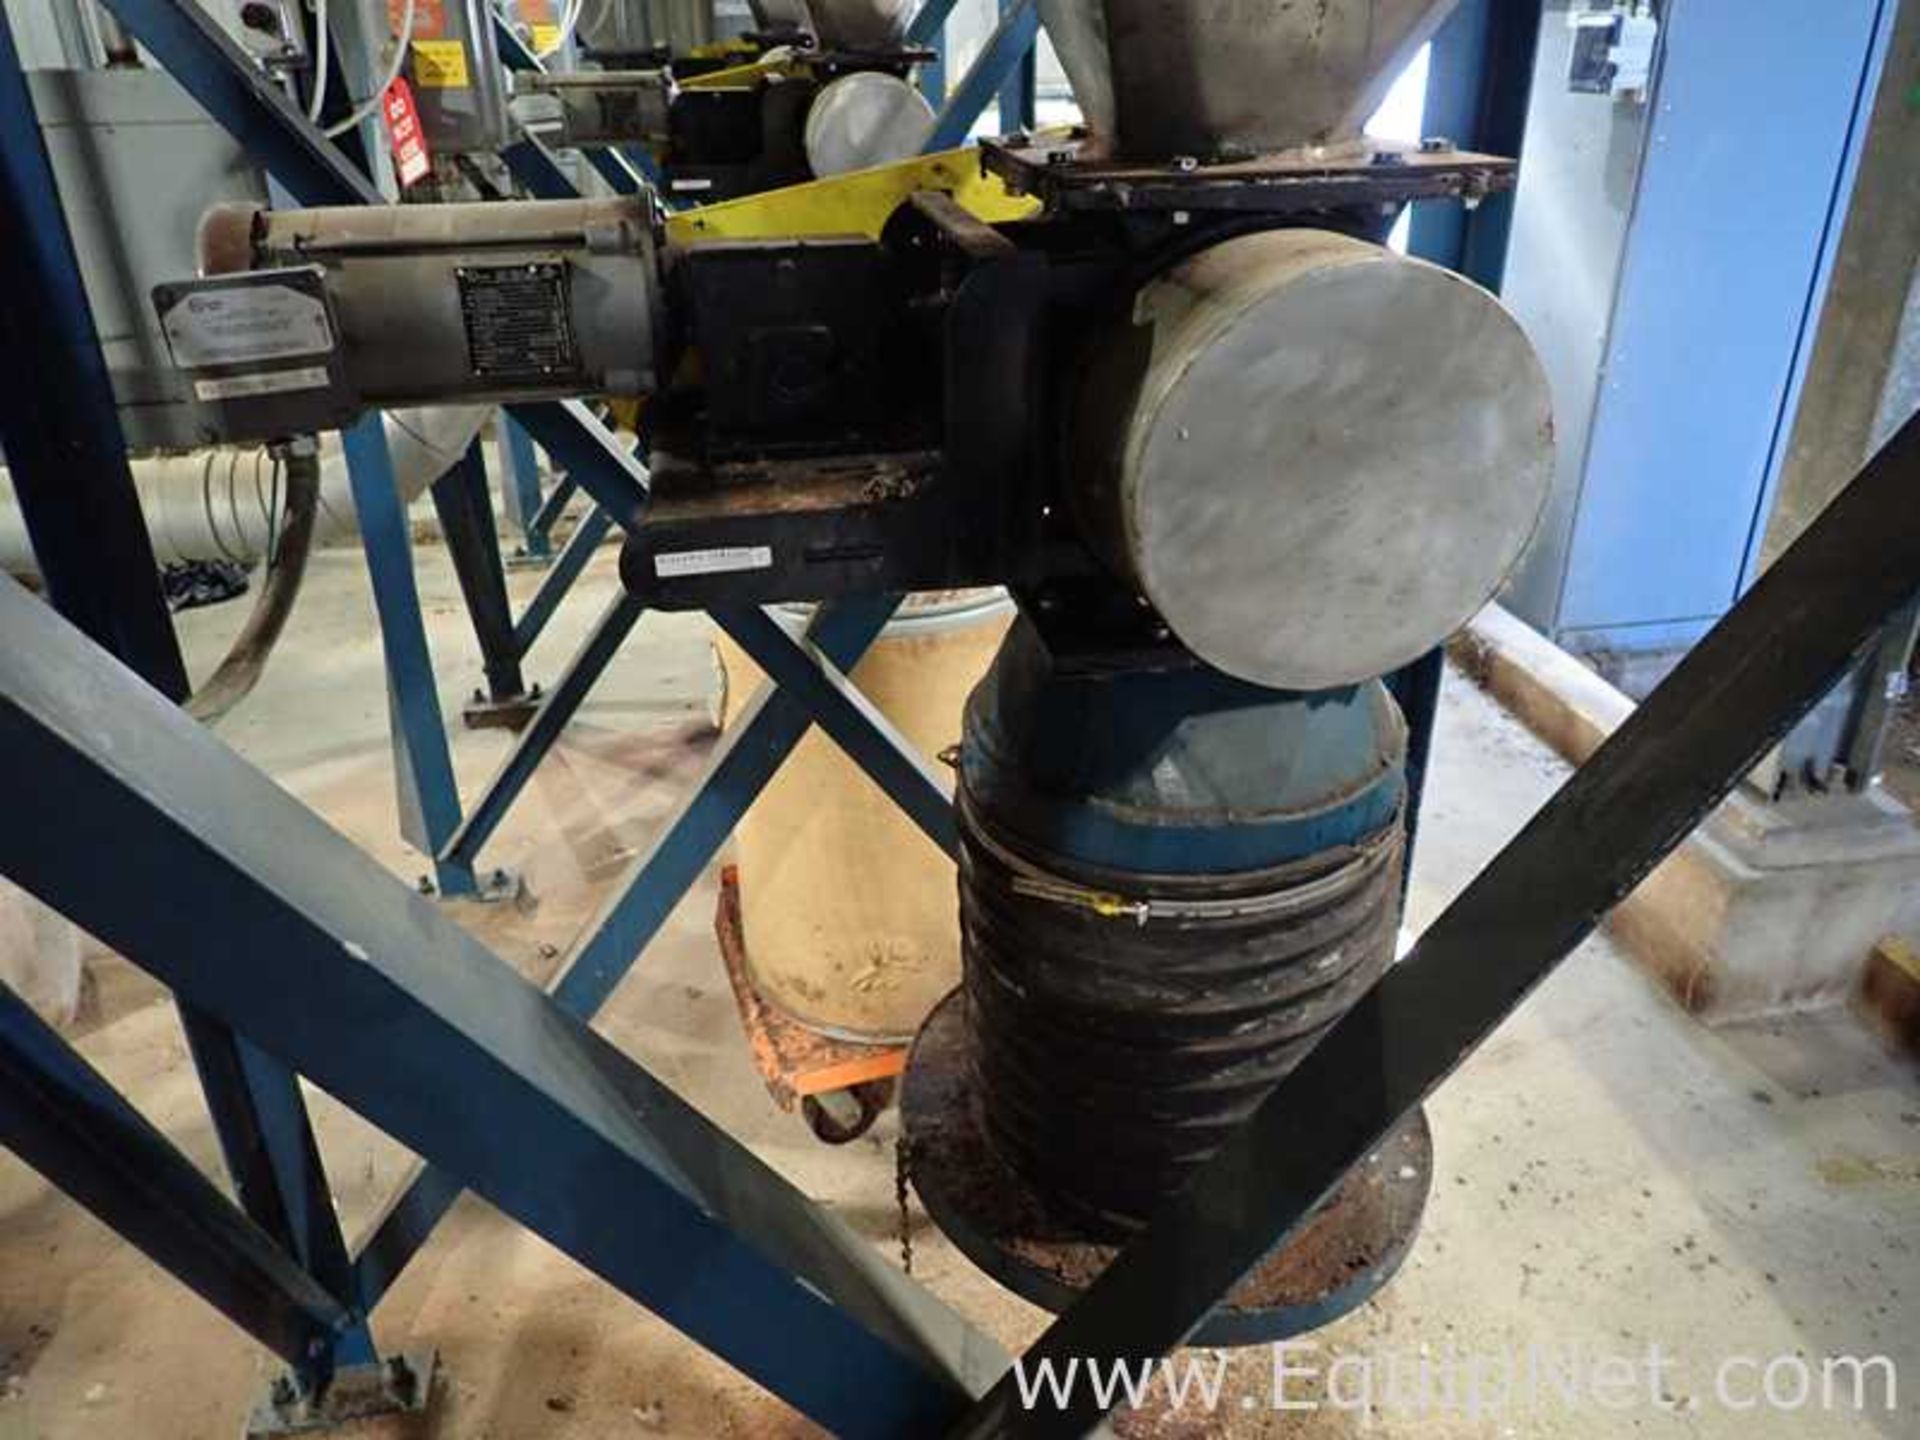 Donaldson Torit DFT 2-4 Dust Collector System - Image 4 of 11